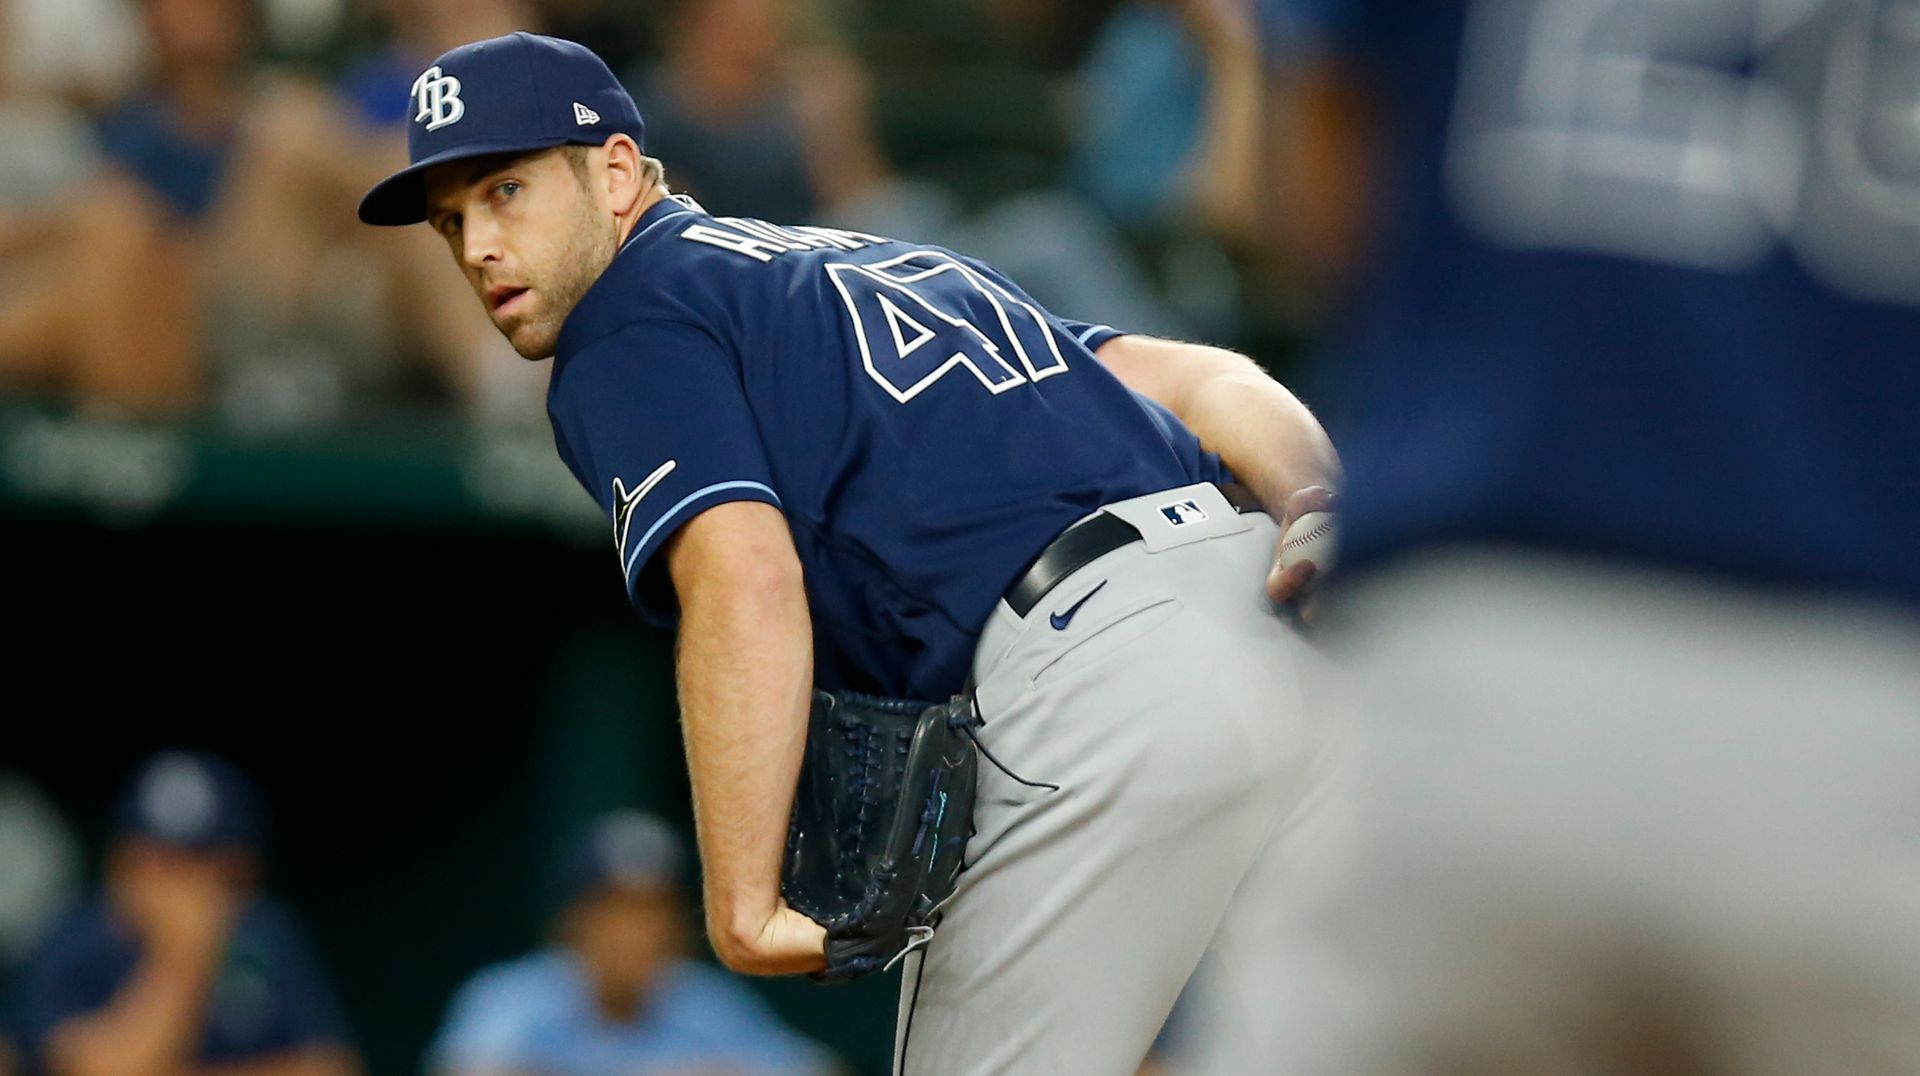 Rays pitcher explains reprehensible decision to remove LGBTQ+ pride patch  from jersey